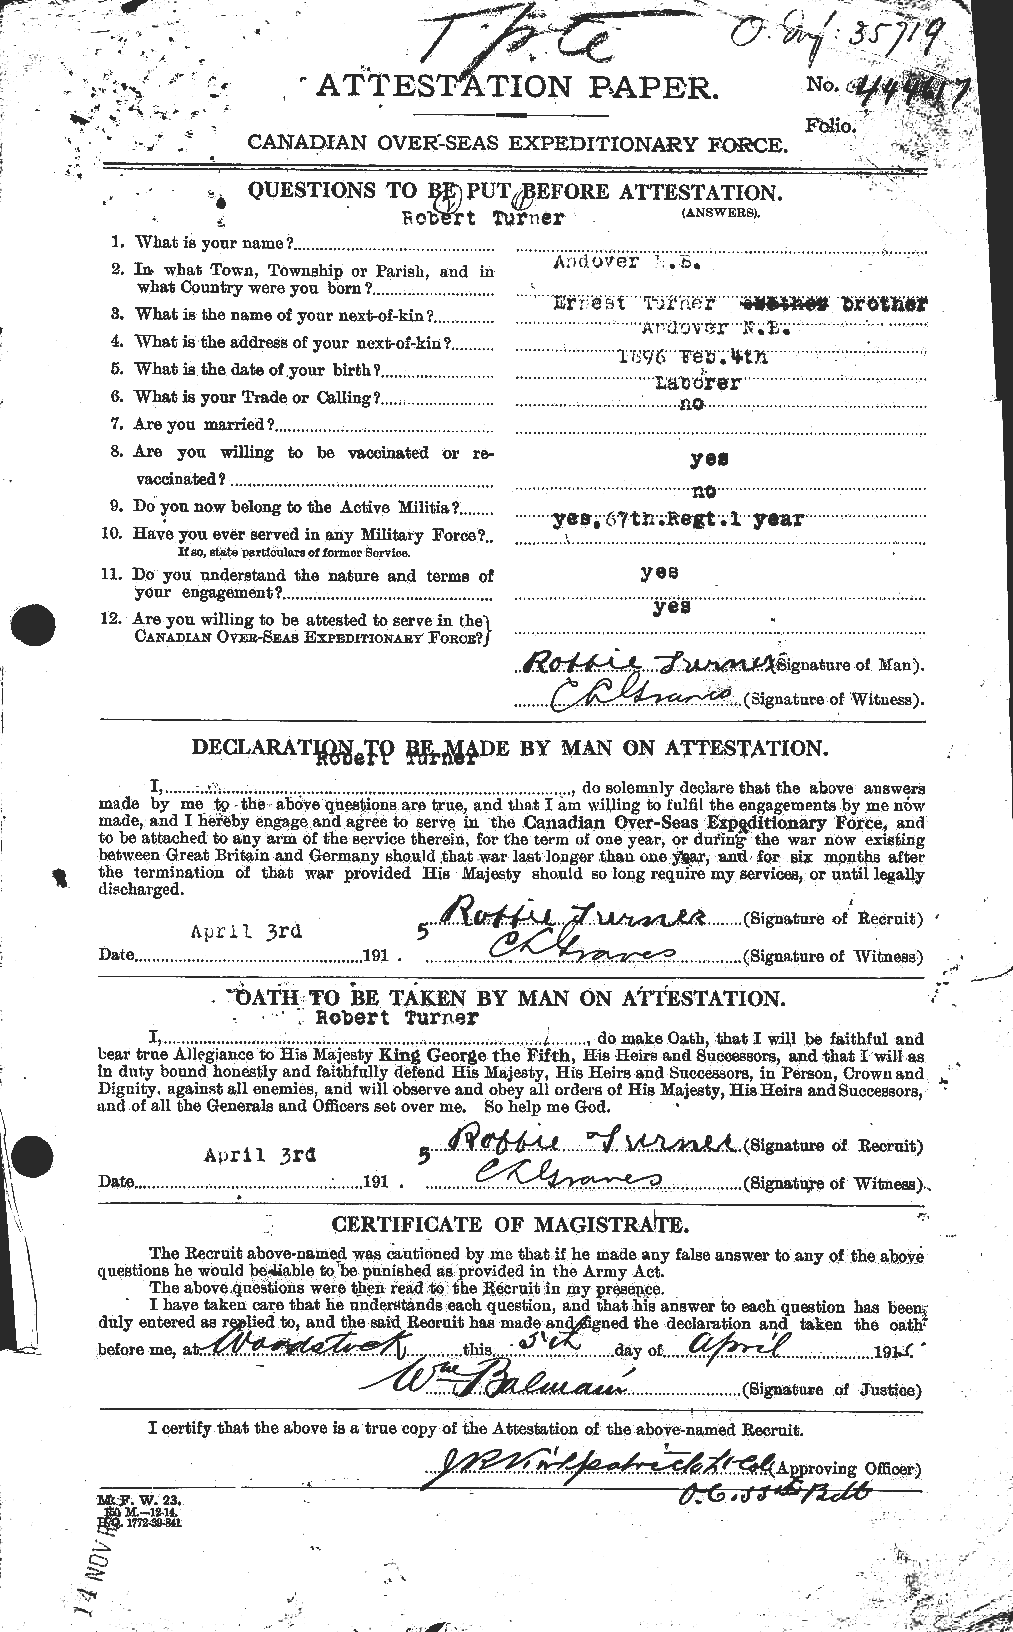 Personnel Records of the First World War - CEF 643824a